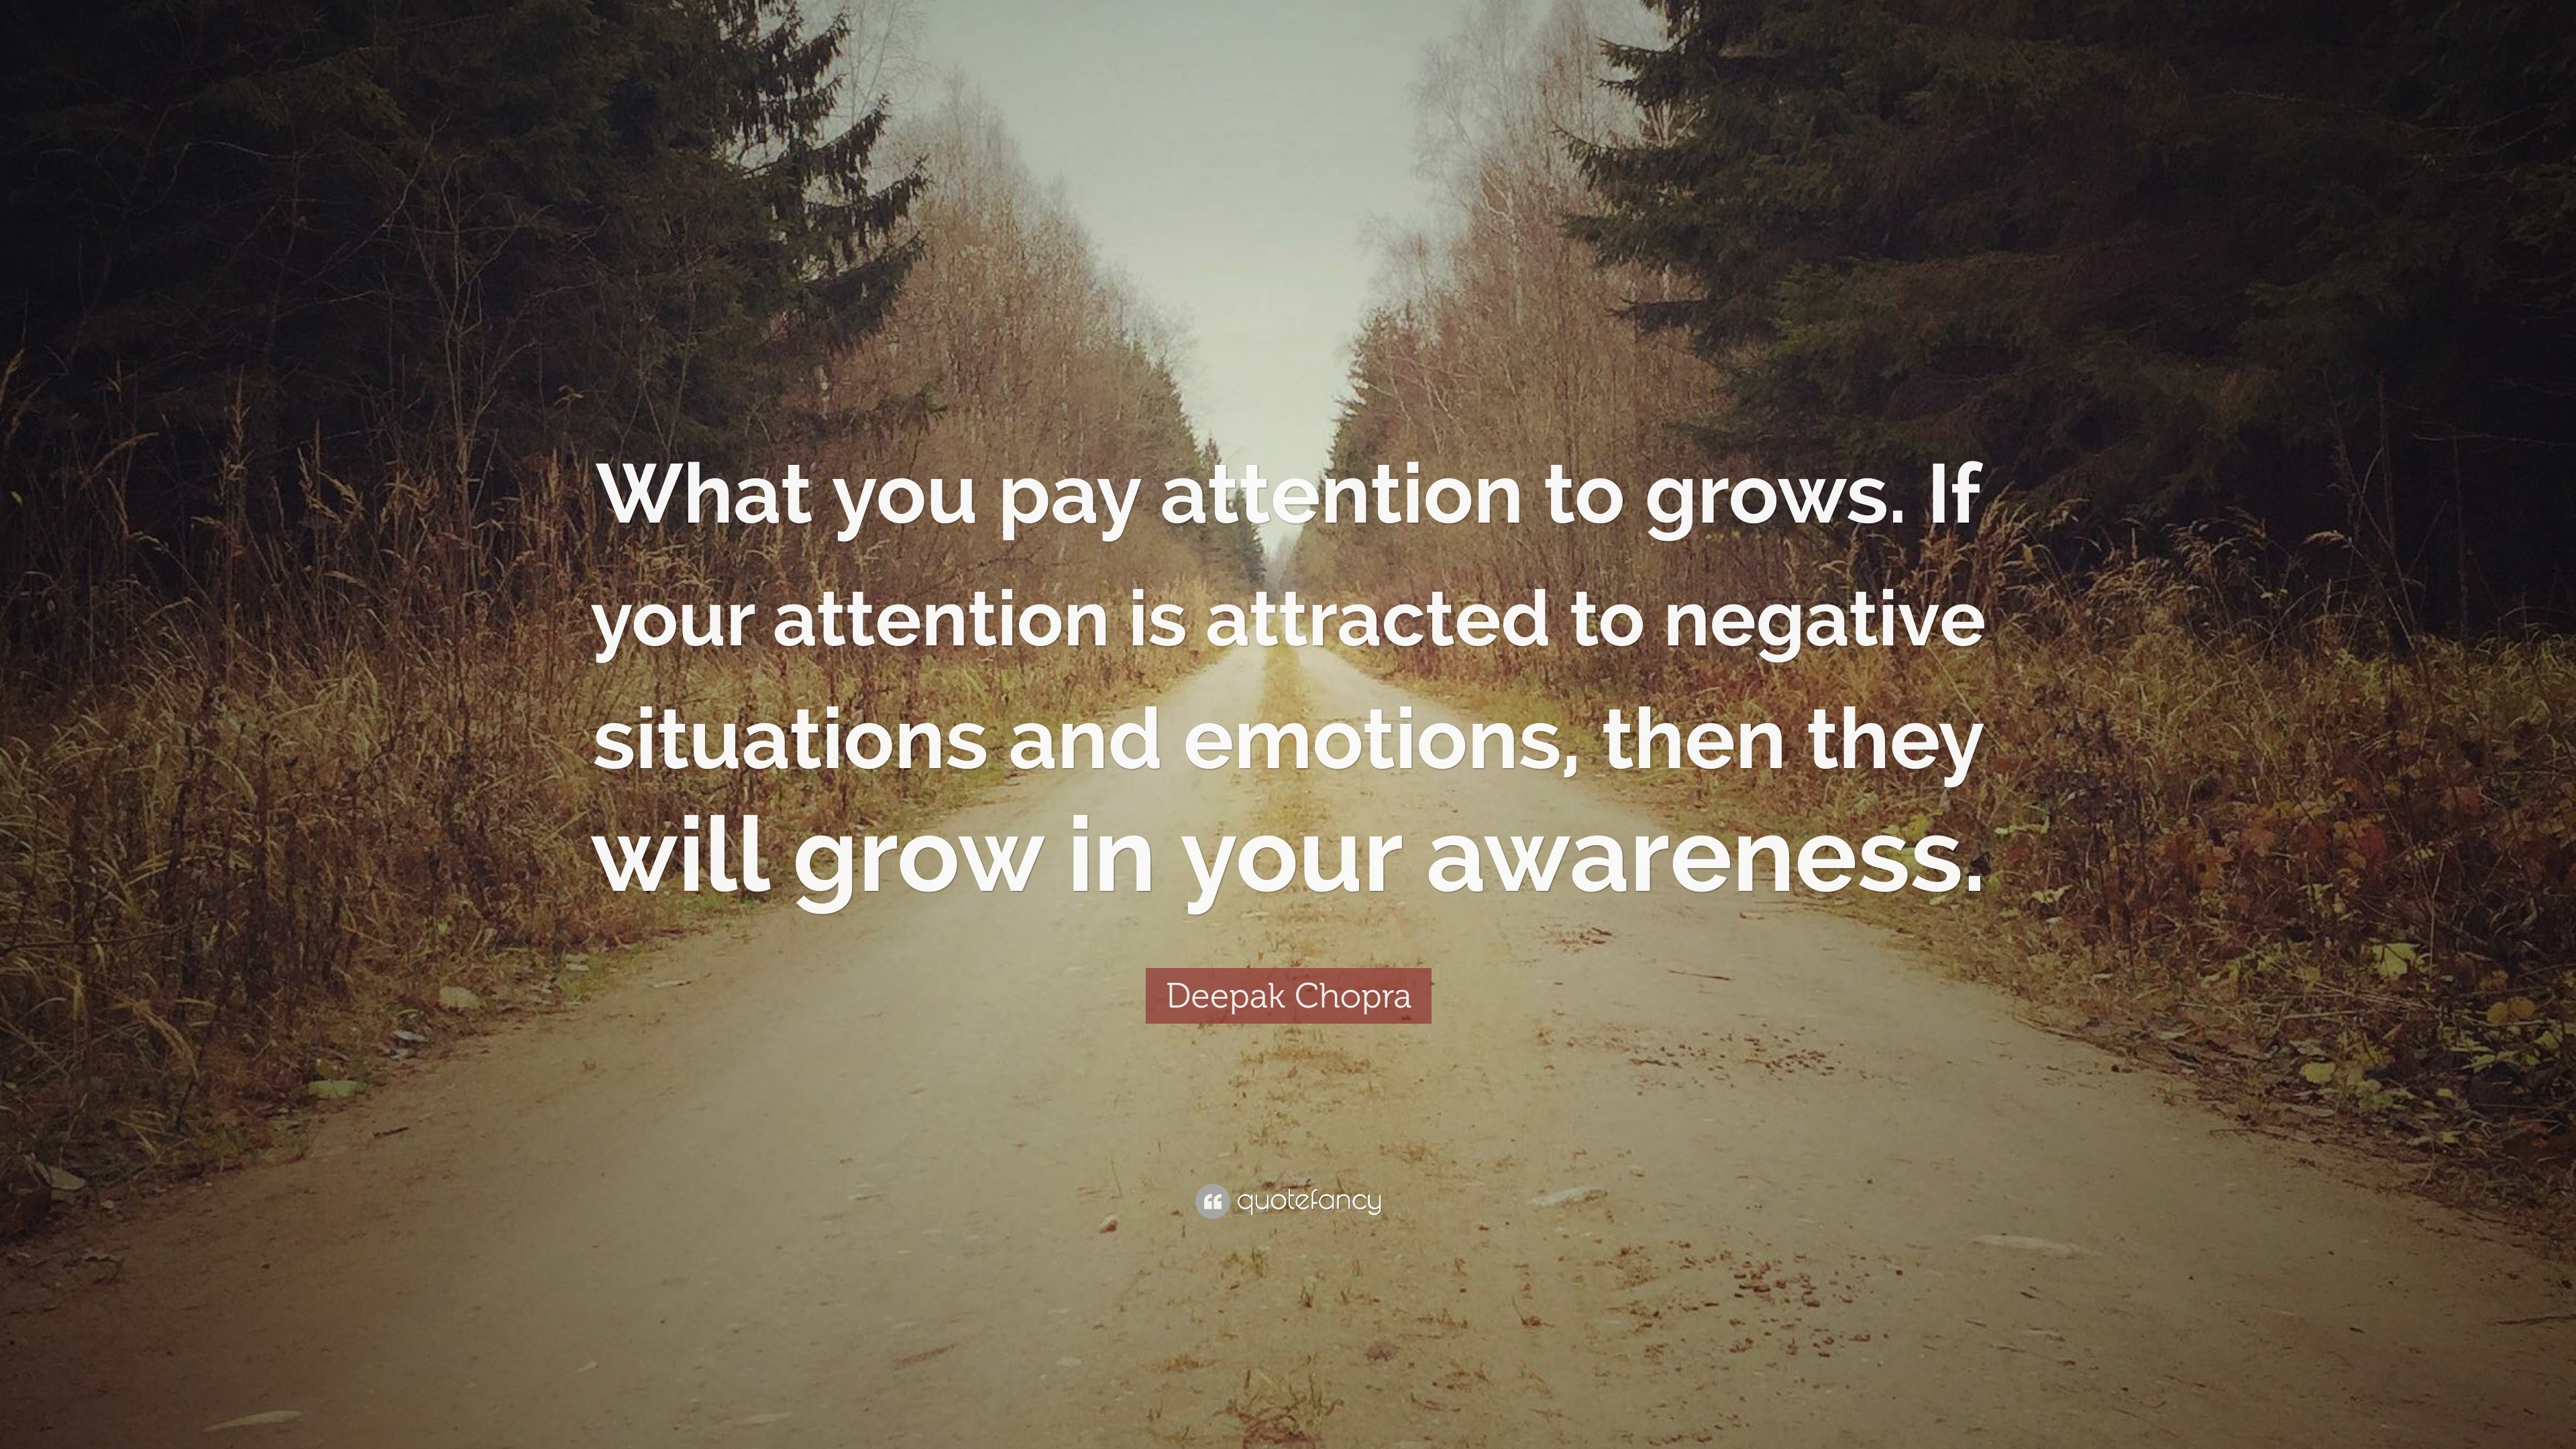 Deepak Chopra Quote: “What you pay attention to grows. If your